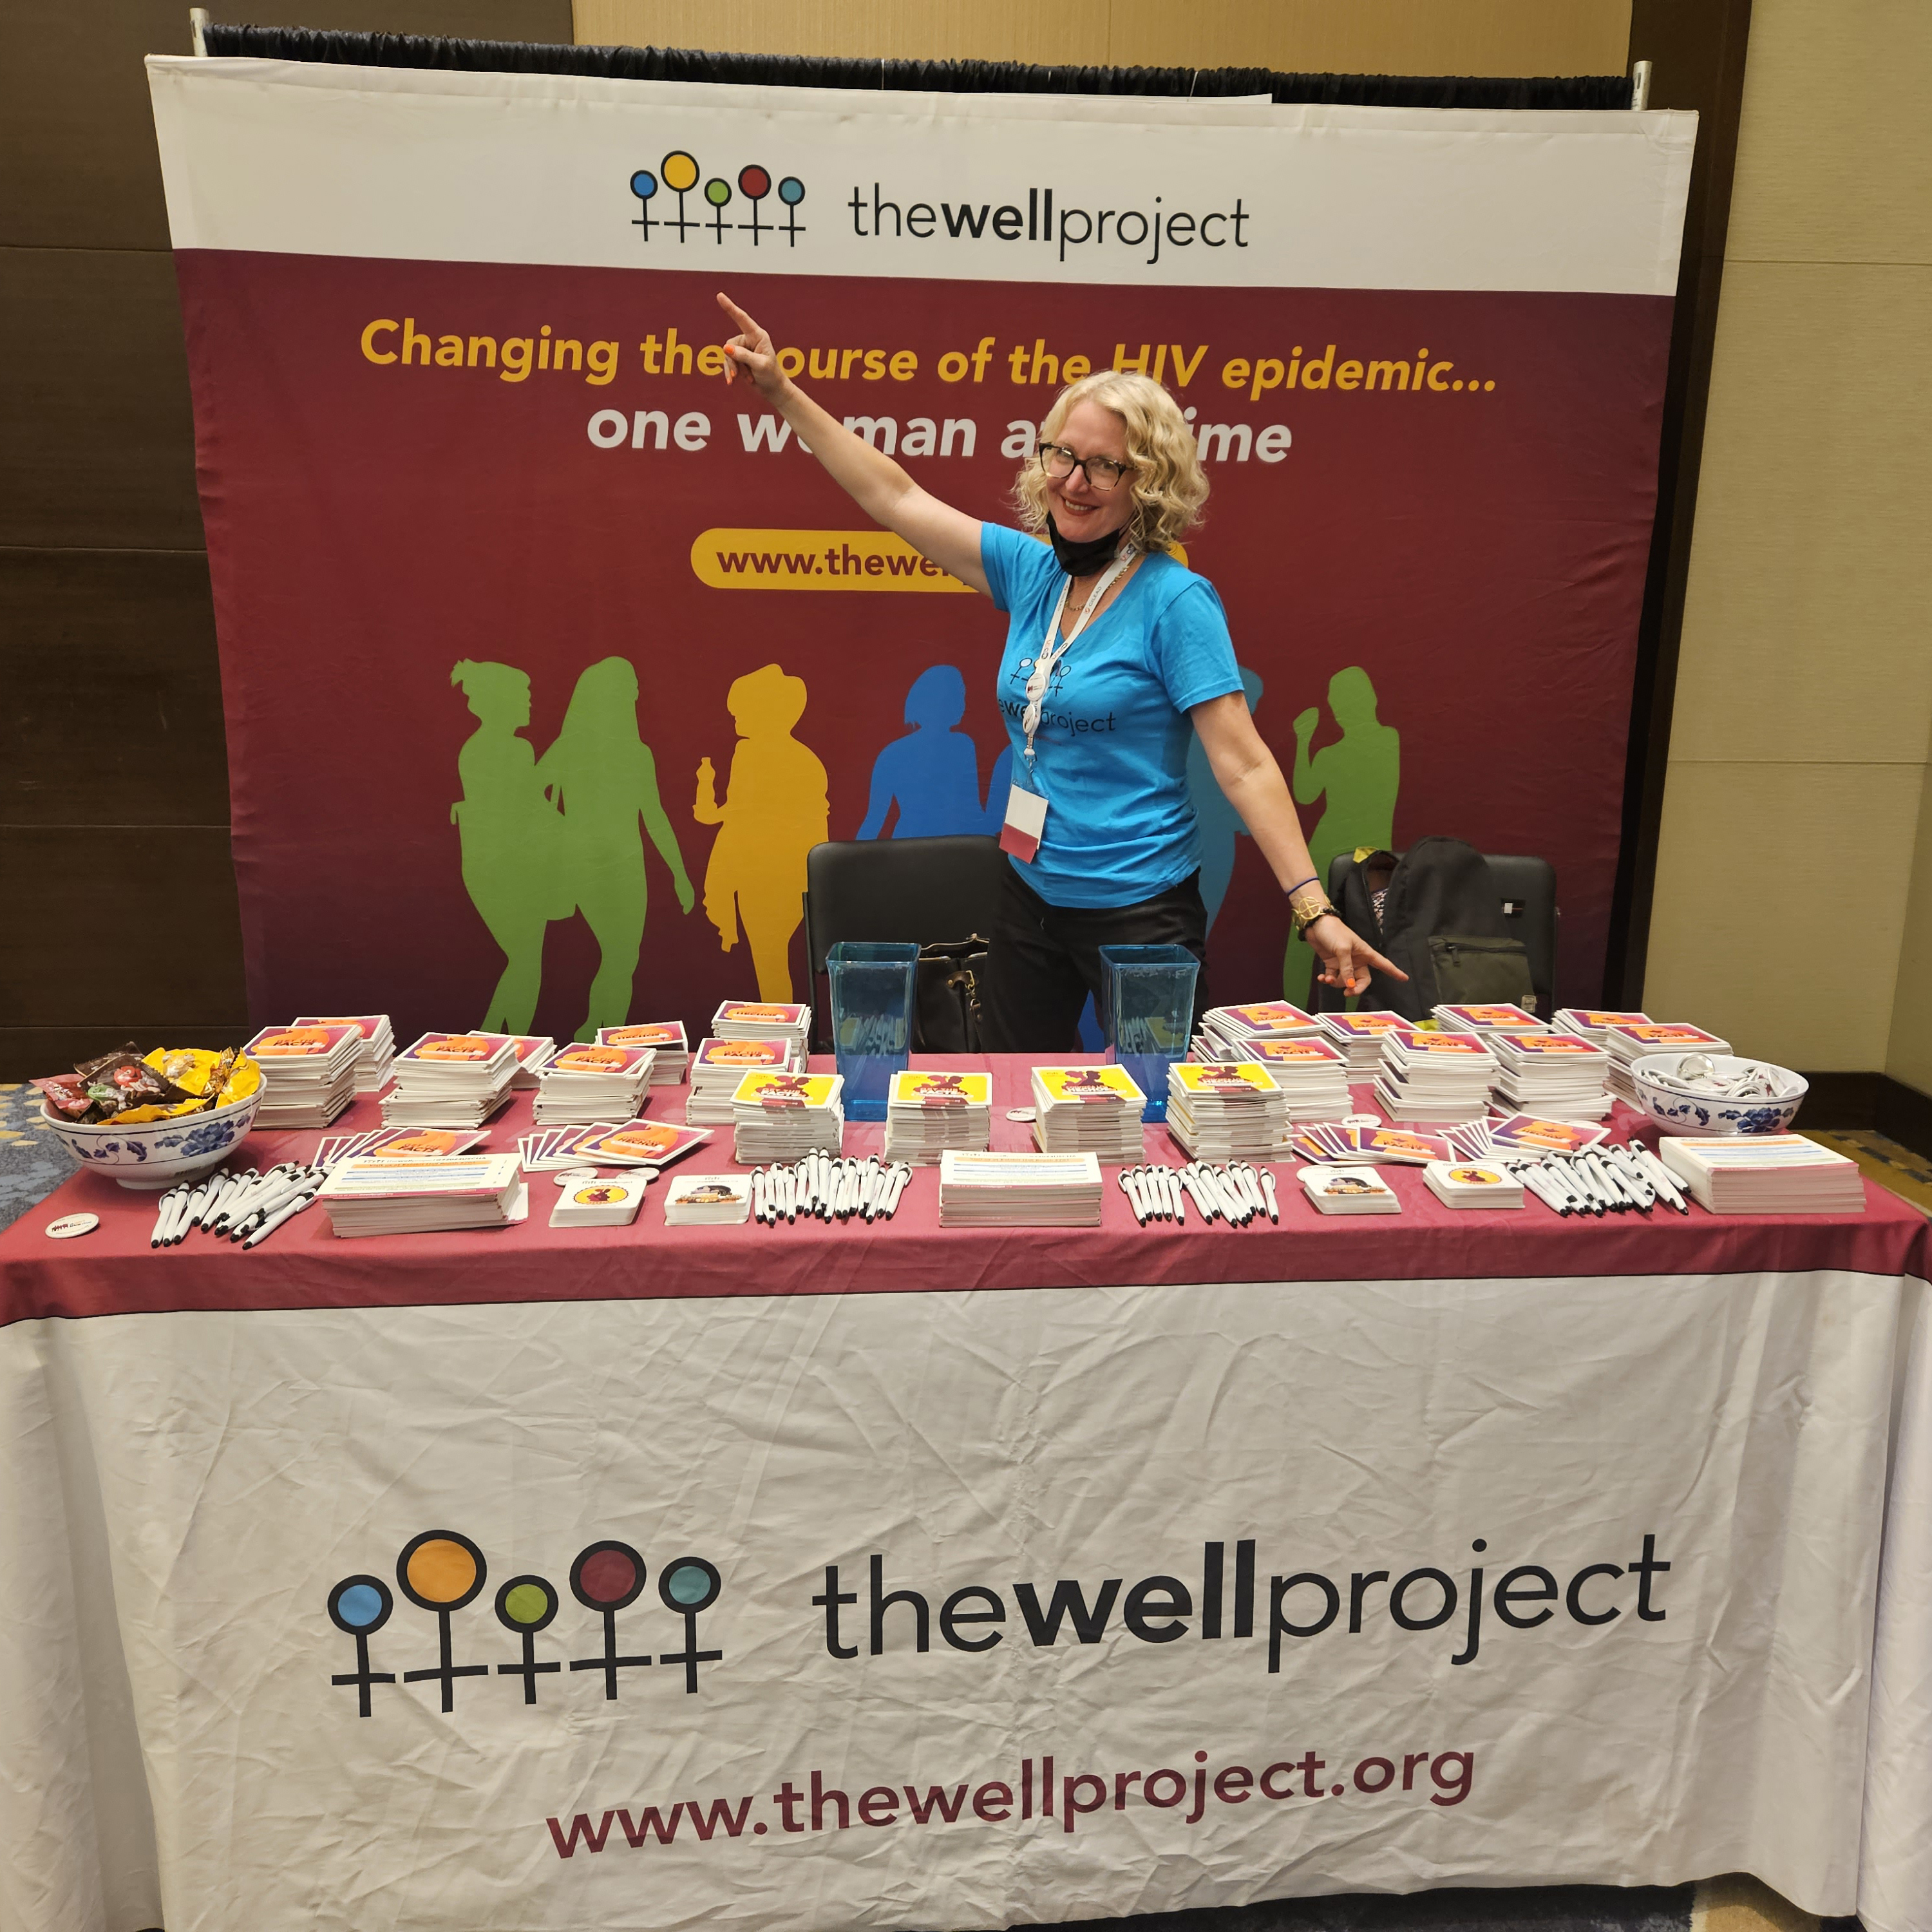 The Well Project's executive director, Krista Martel, at our booth at USCHA.